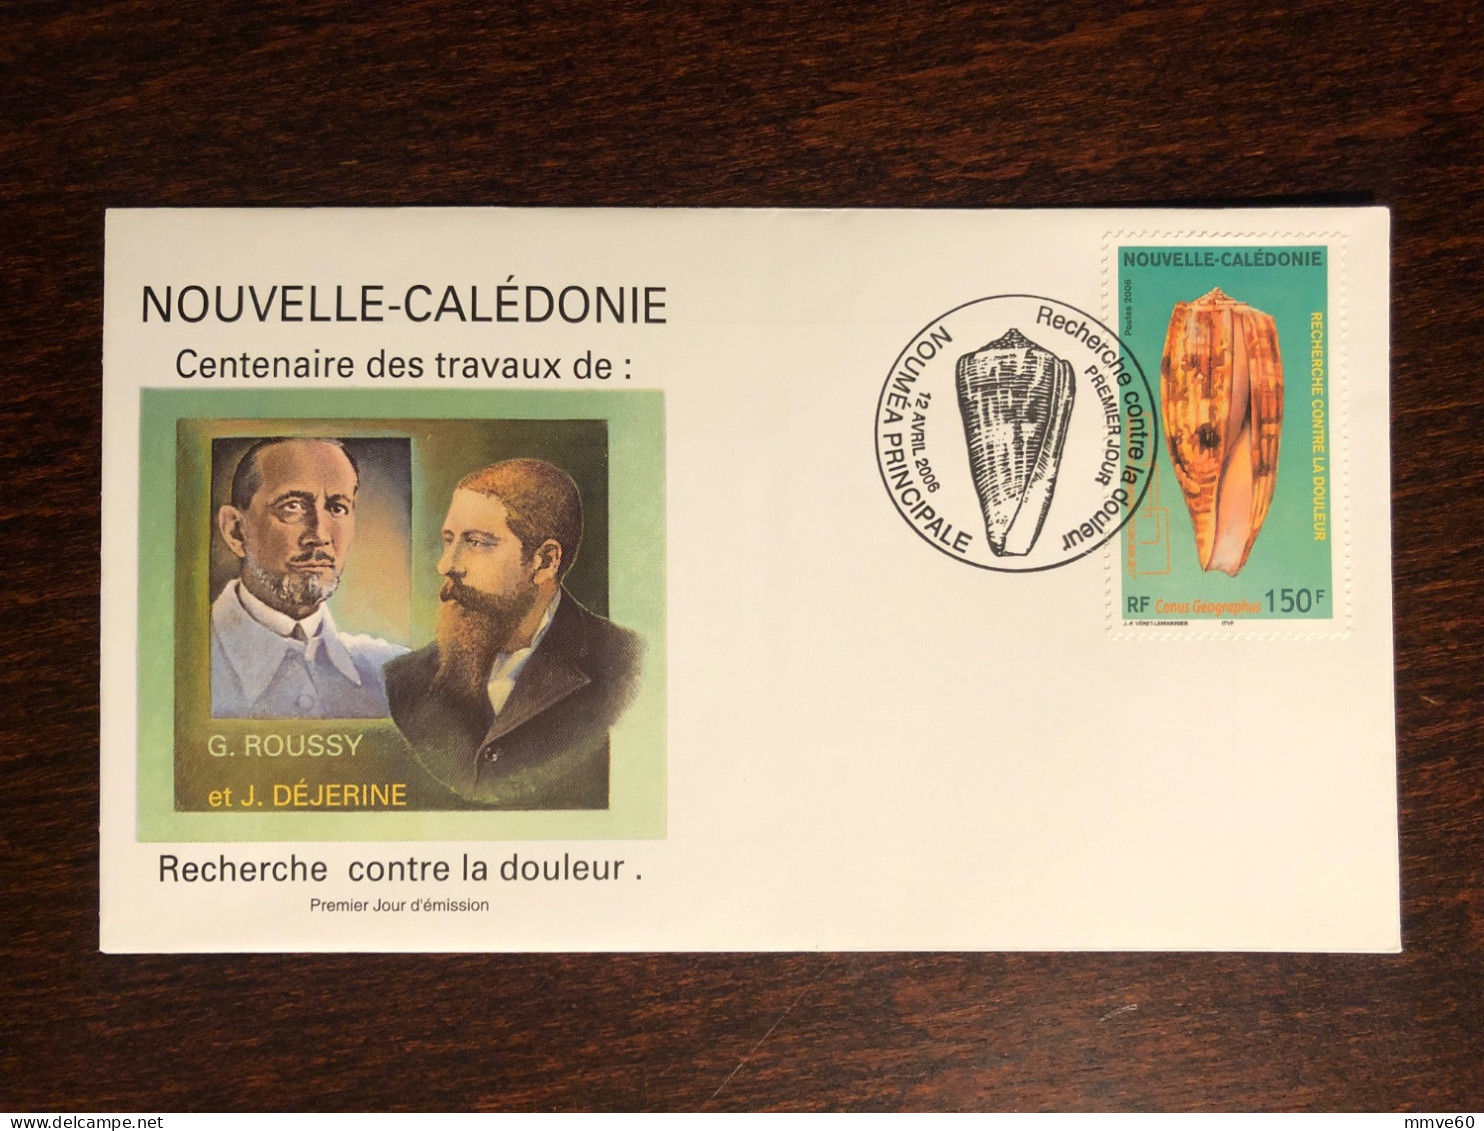 NEW CALEDONIA NOUVELLE CALEDONIE FDC COVER 2006 YEAR PAIN RESEARCH NEUROLOGY HEALTH MEDICINE - Brieven En Documenten